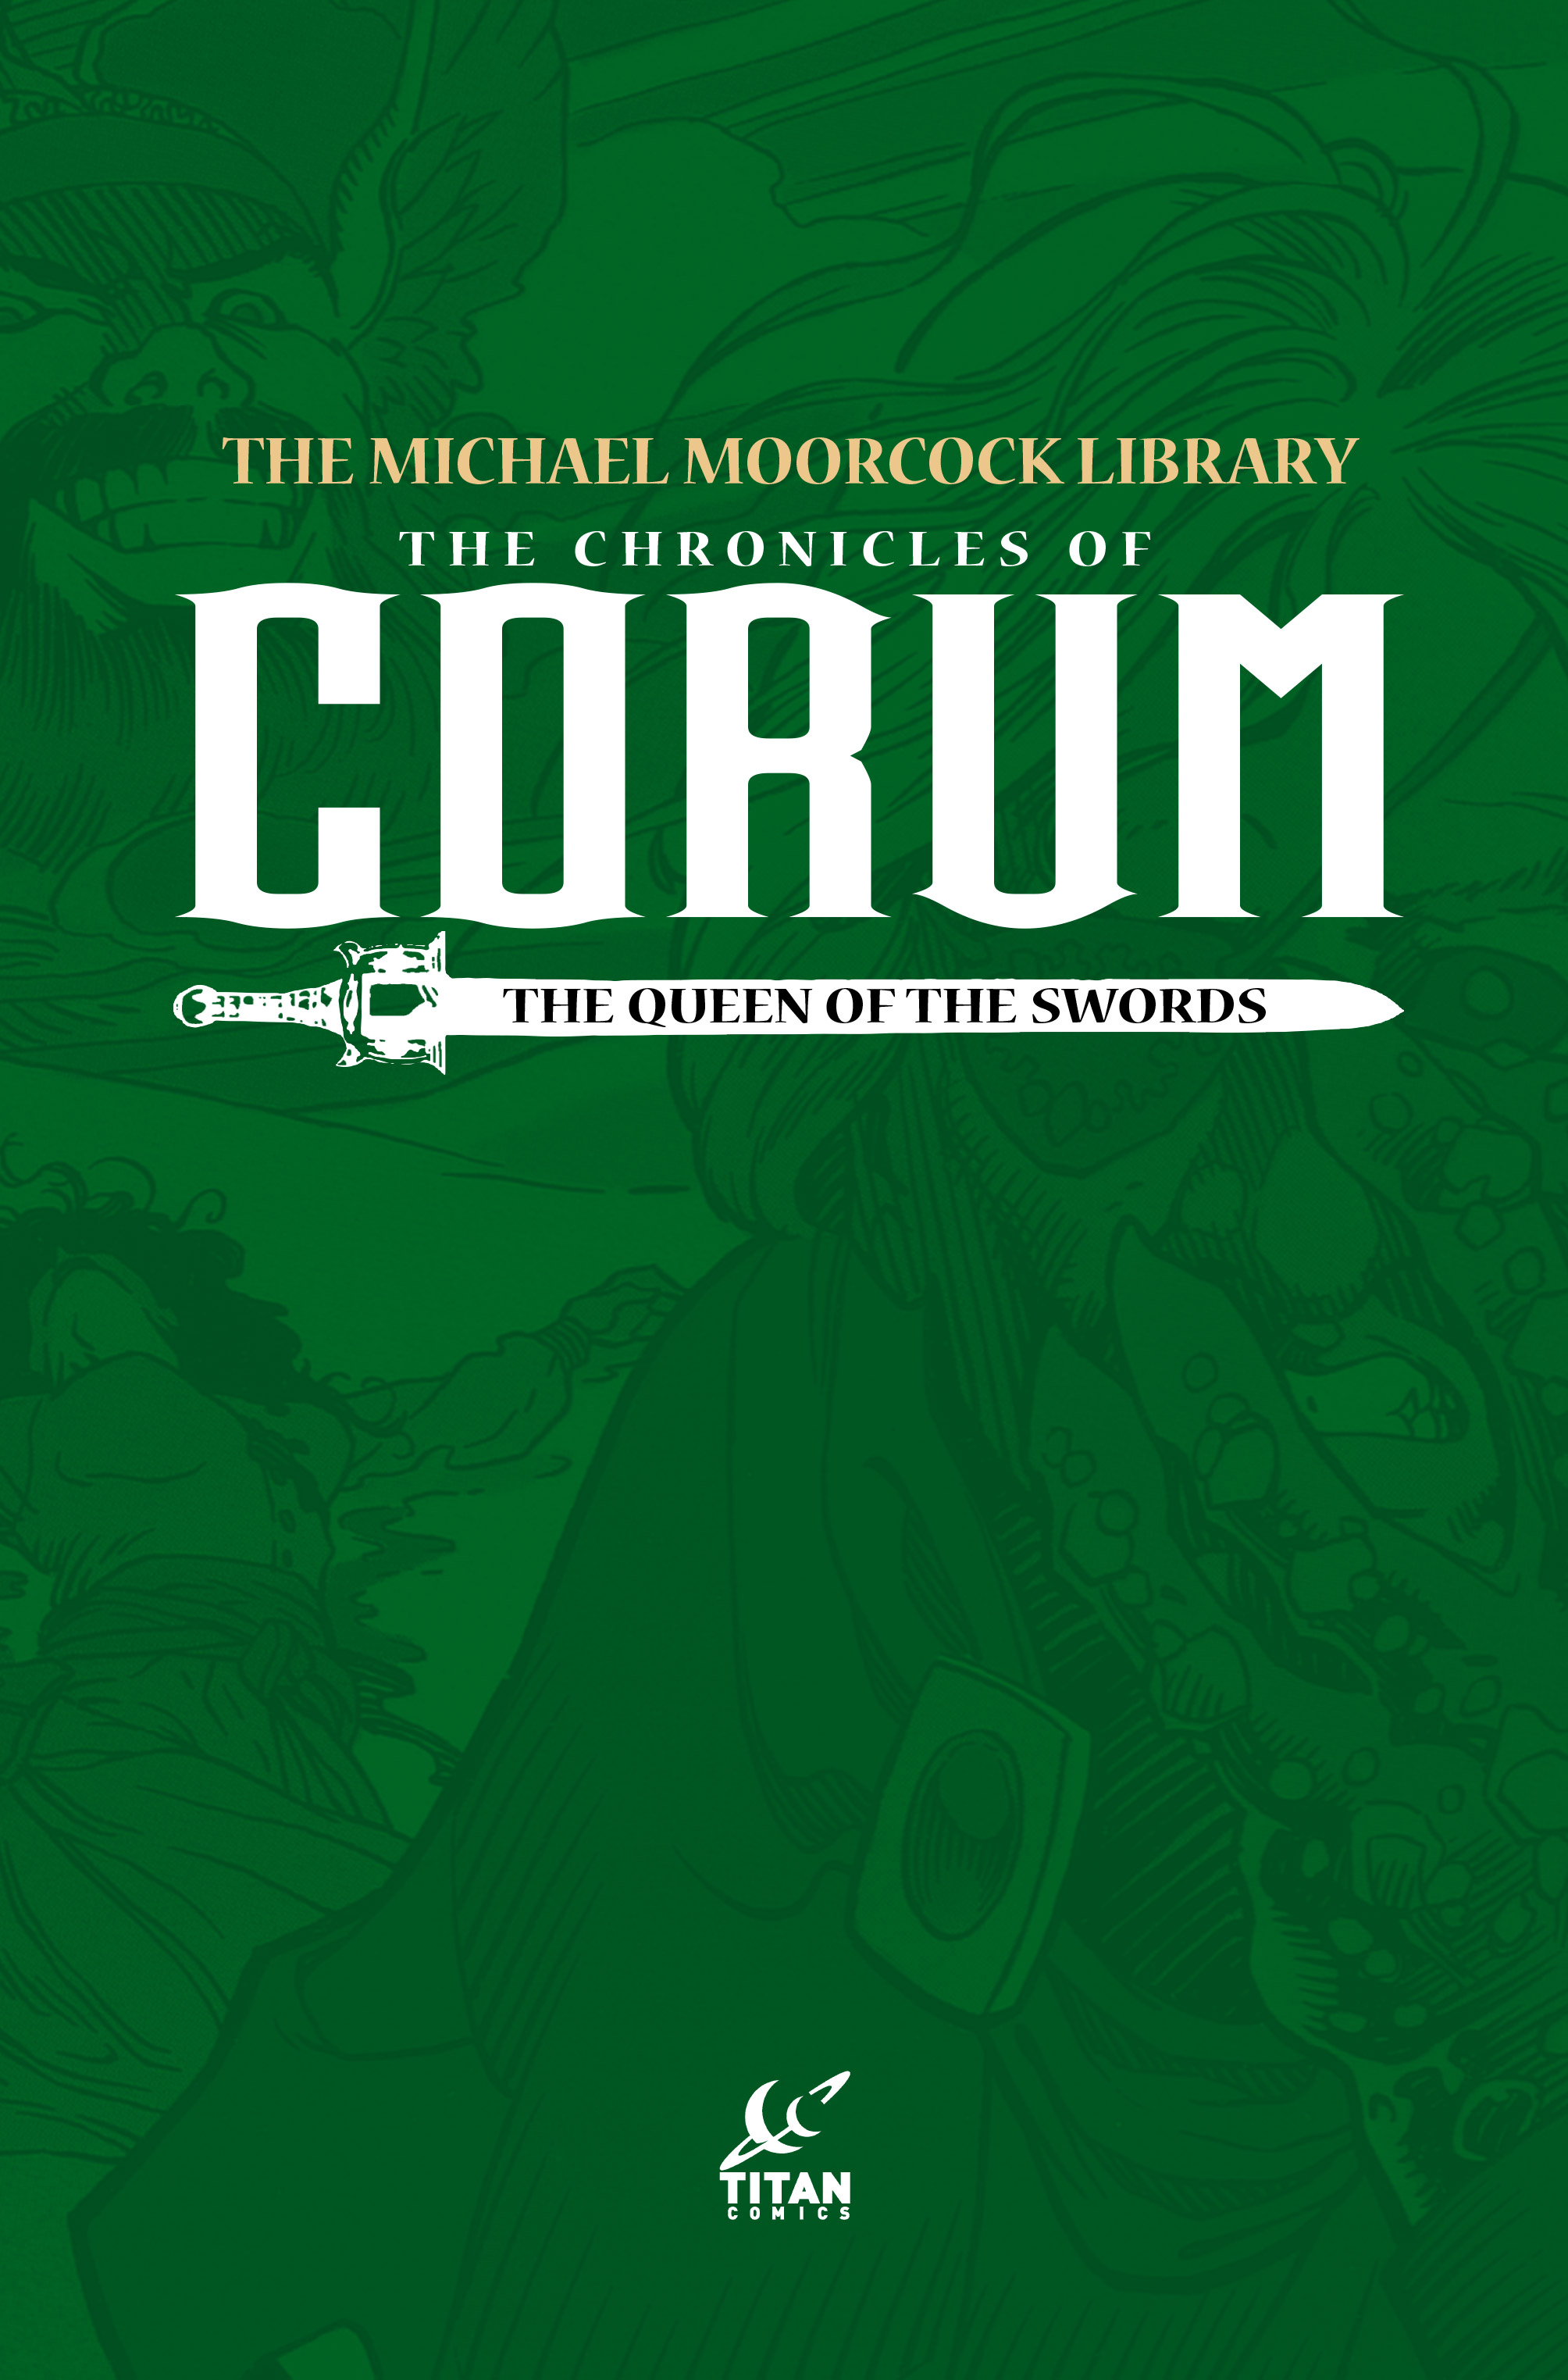 Read online The Michael Moorcock Library comic -  Issue # TPB 8 - 2